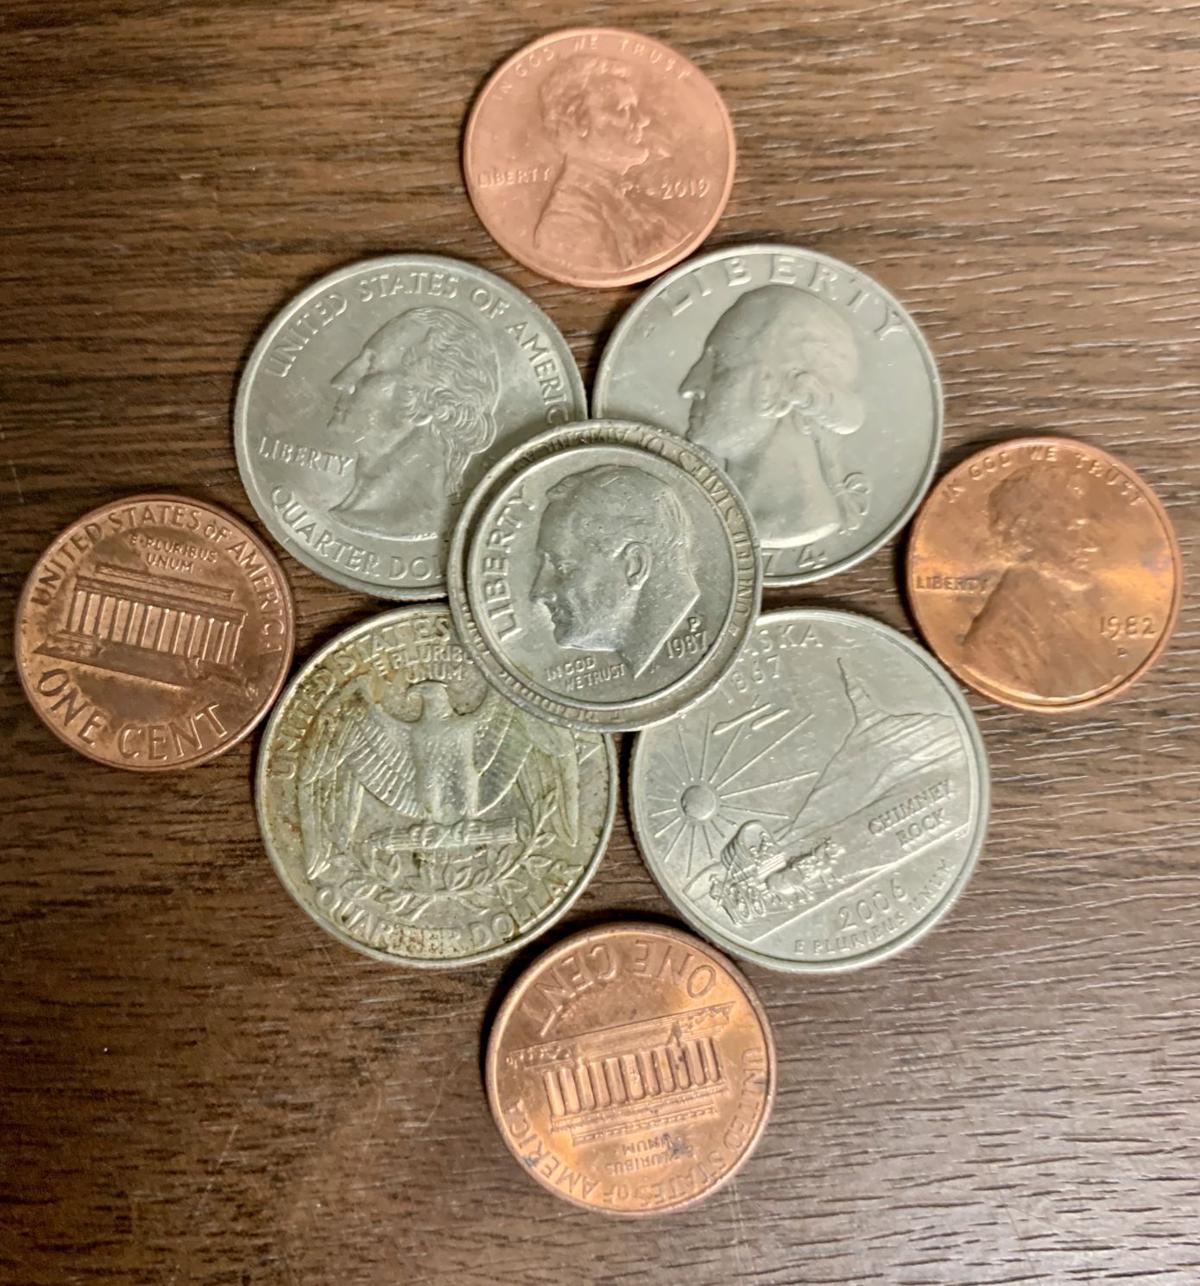 Coin : U S Coin Accents At Lakeshore Learning - A coin is ...